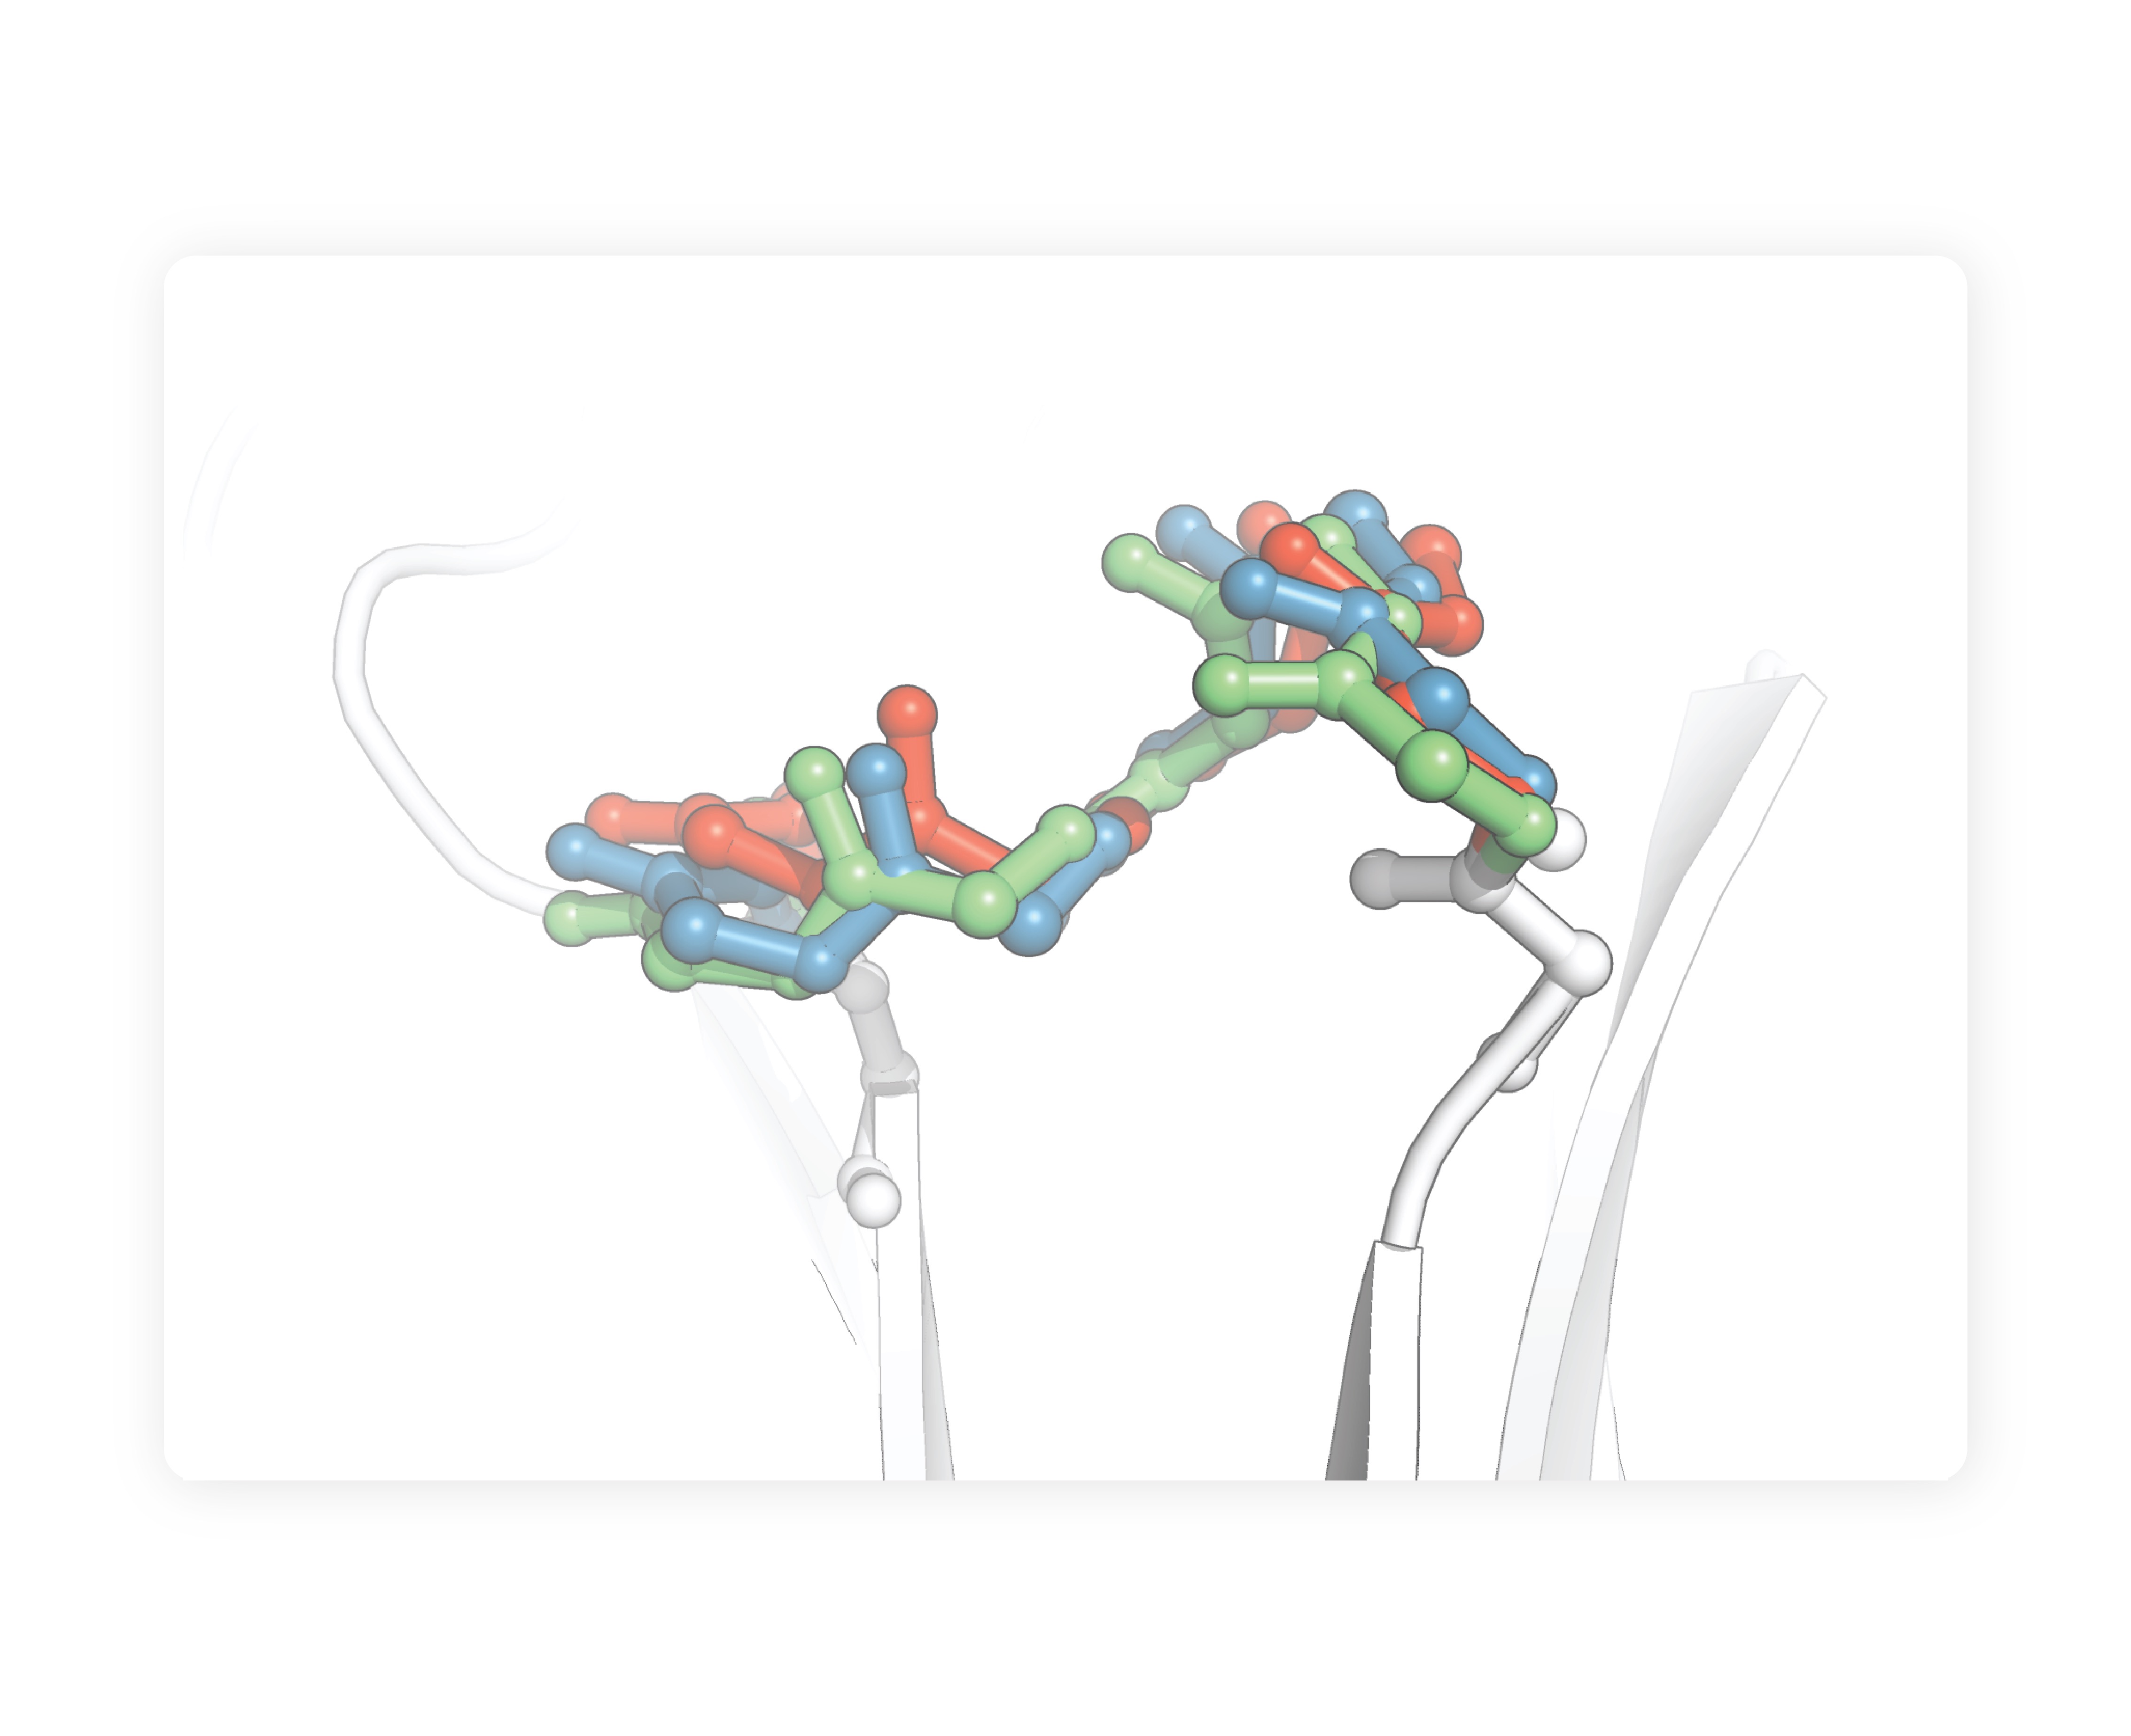 Crystal antibody structure